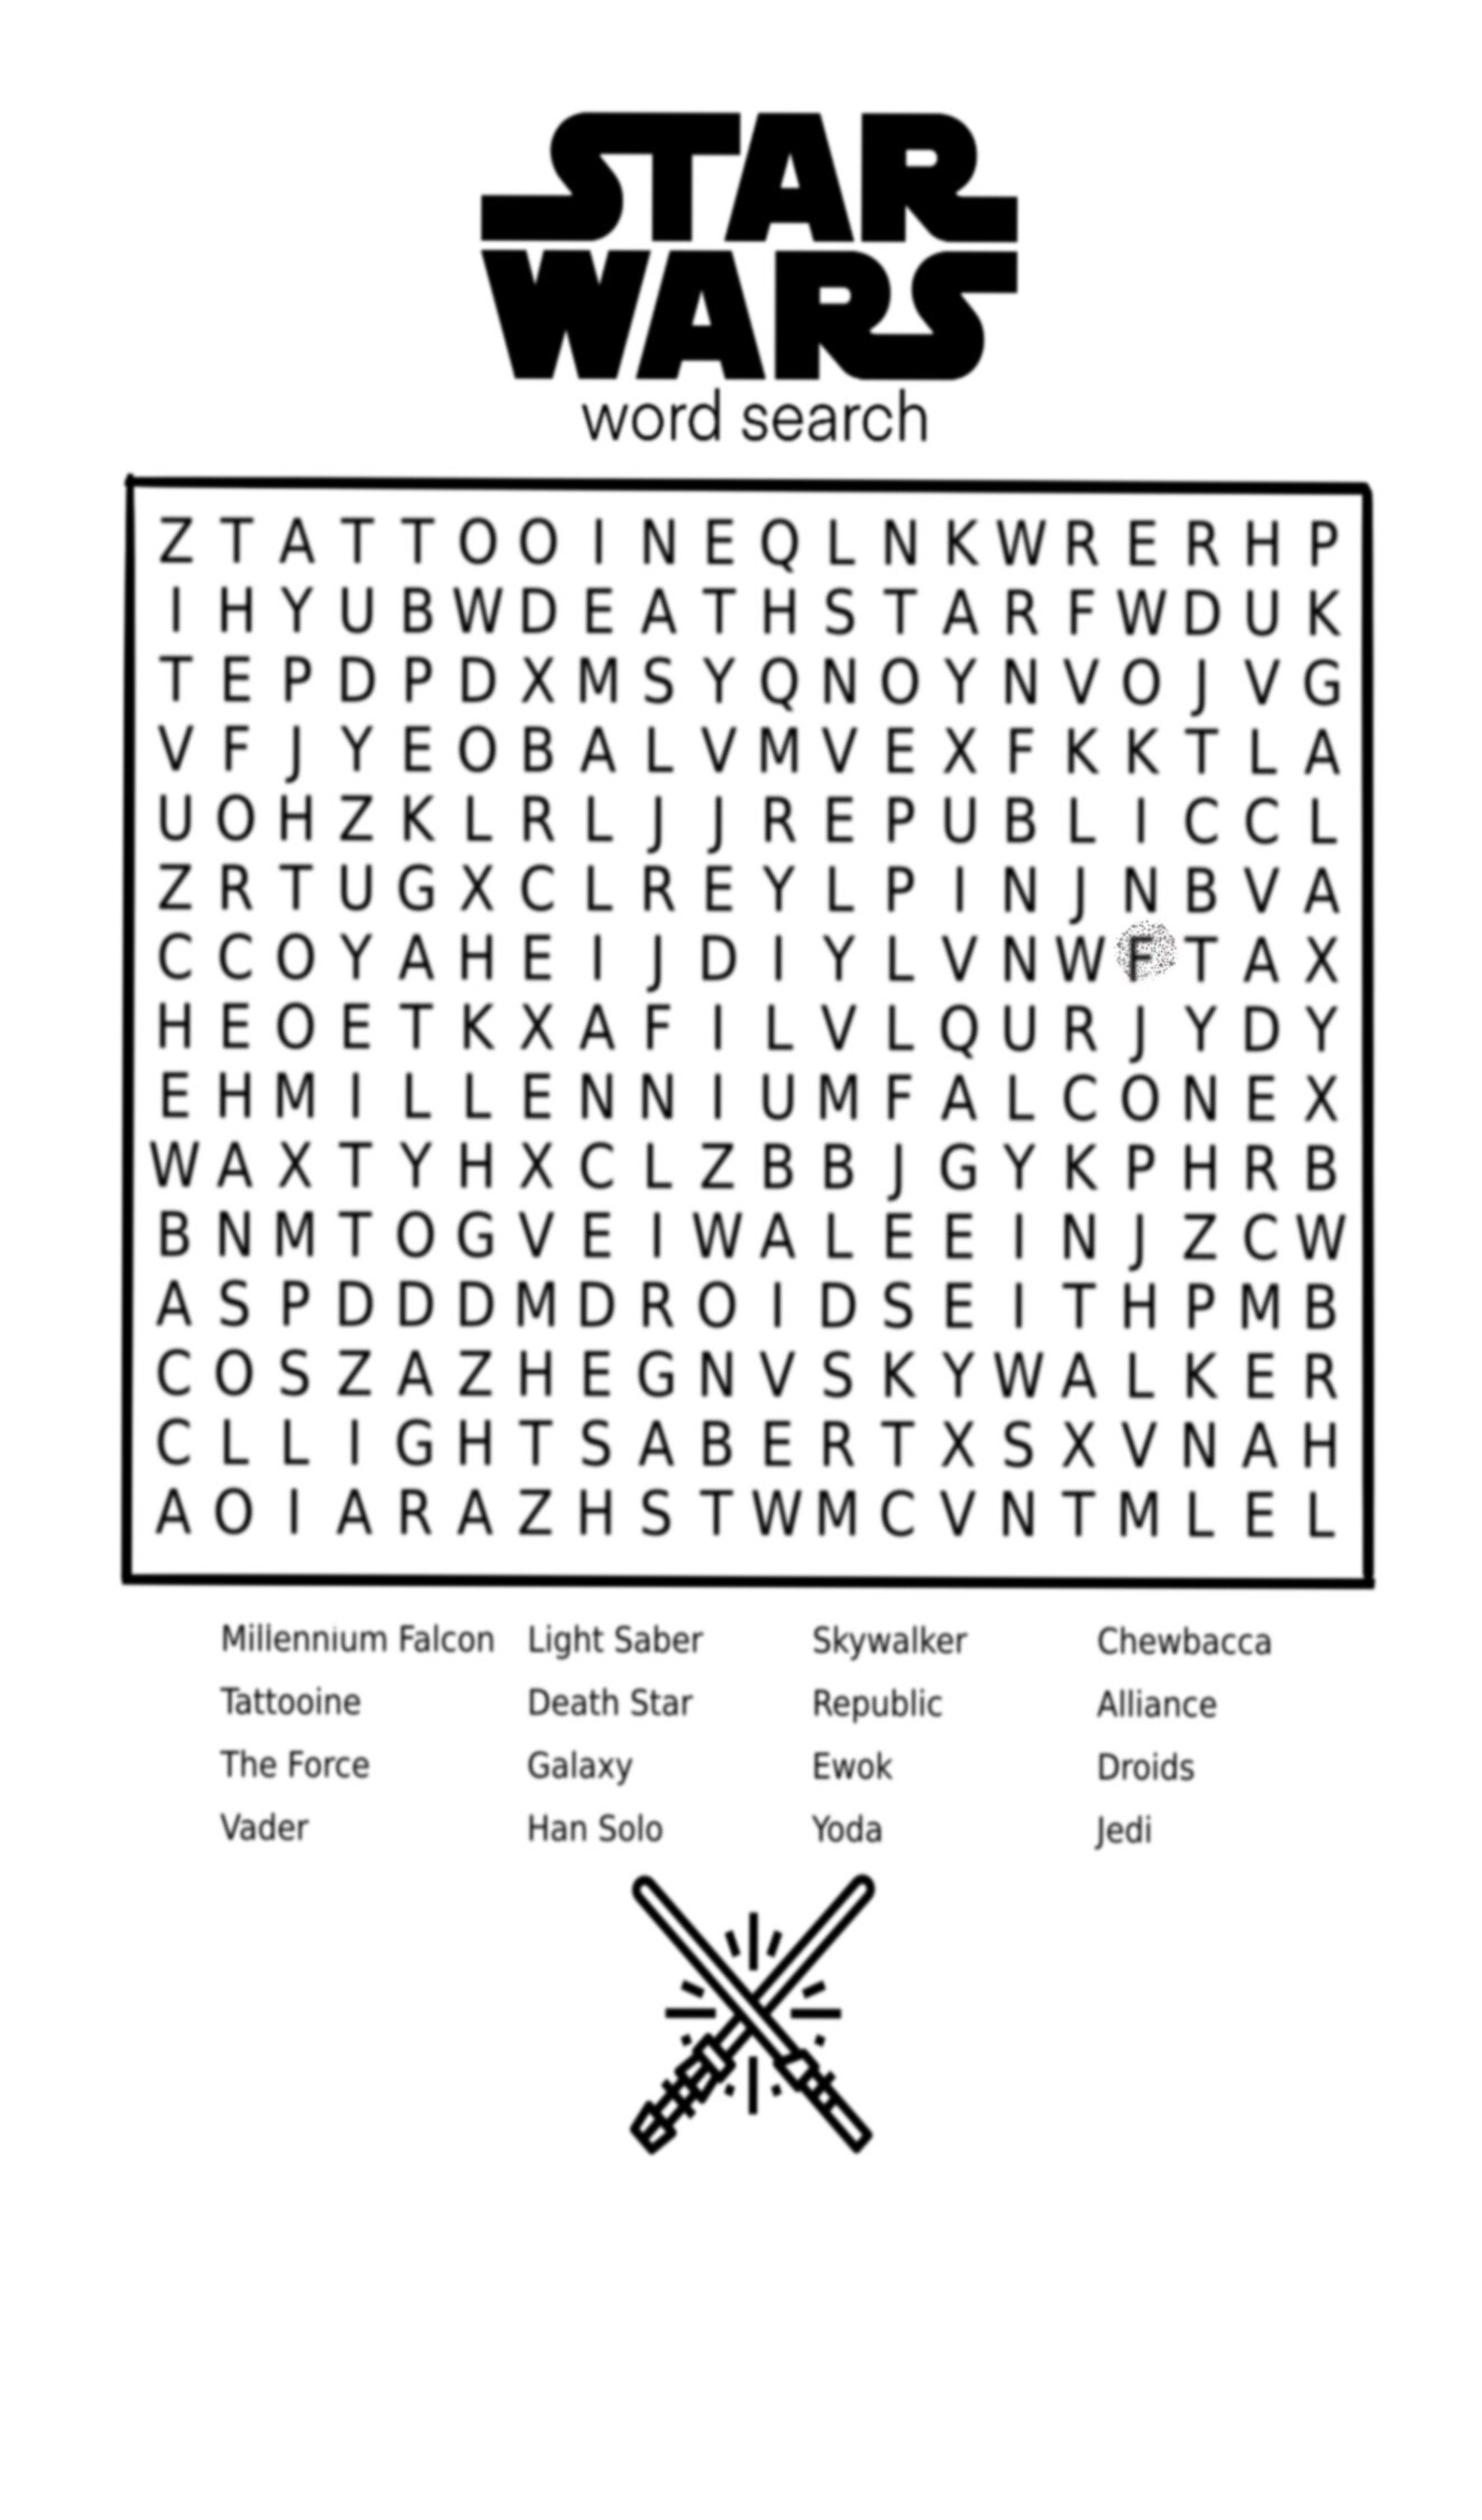 star-wars-word-search-printable-printable-word-searches